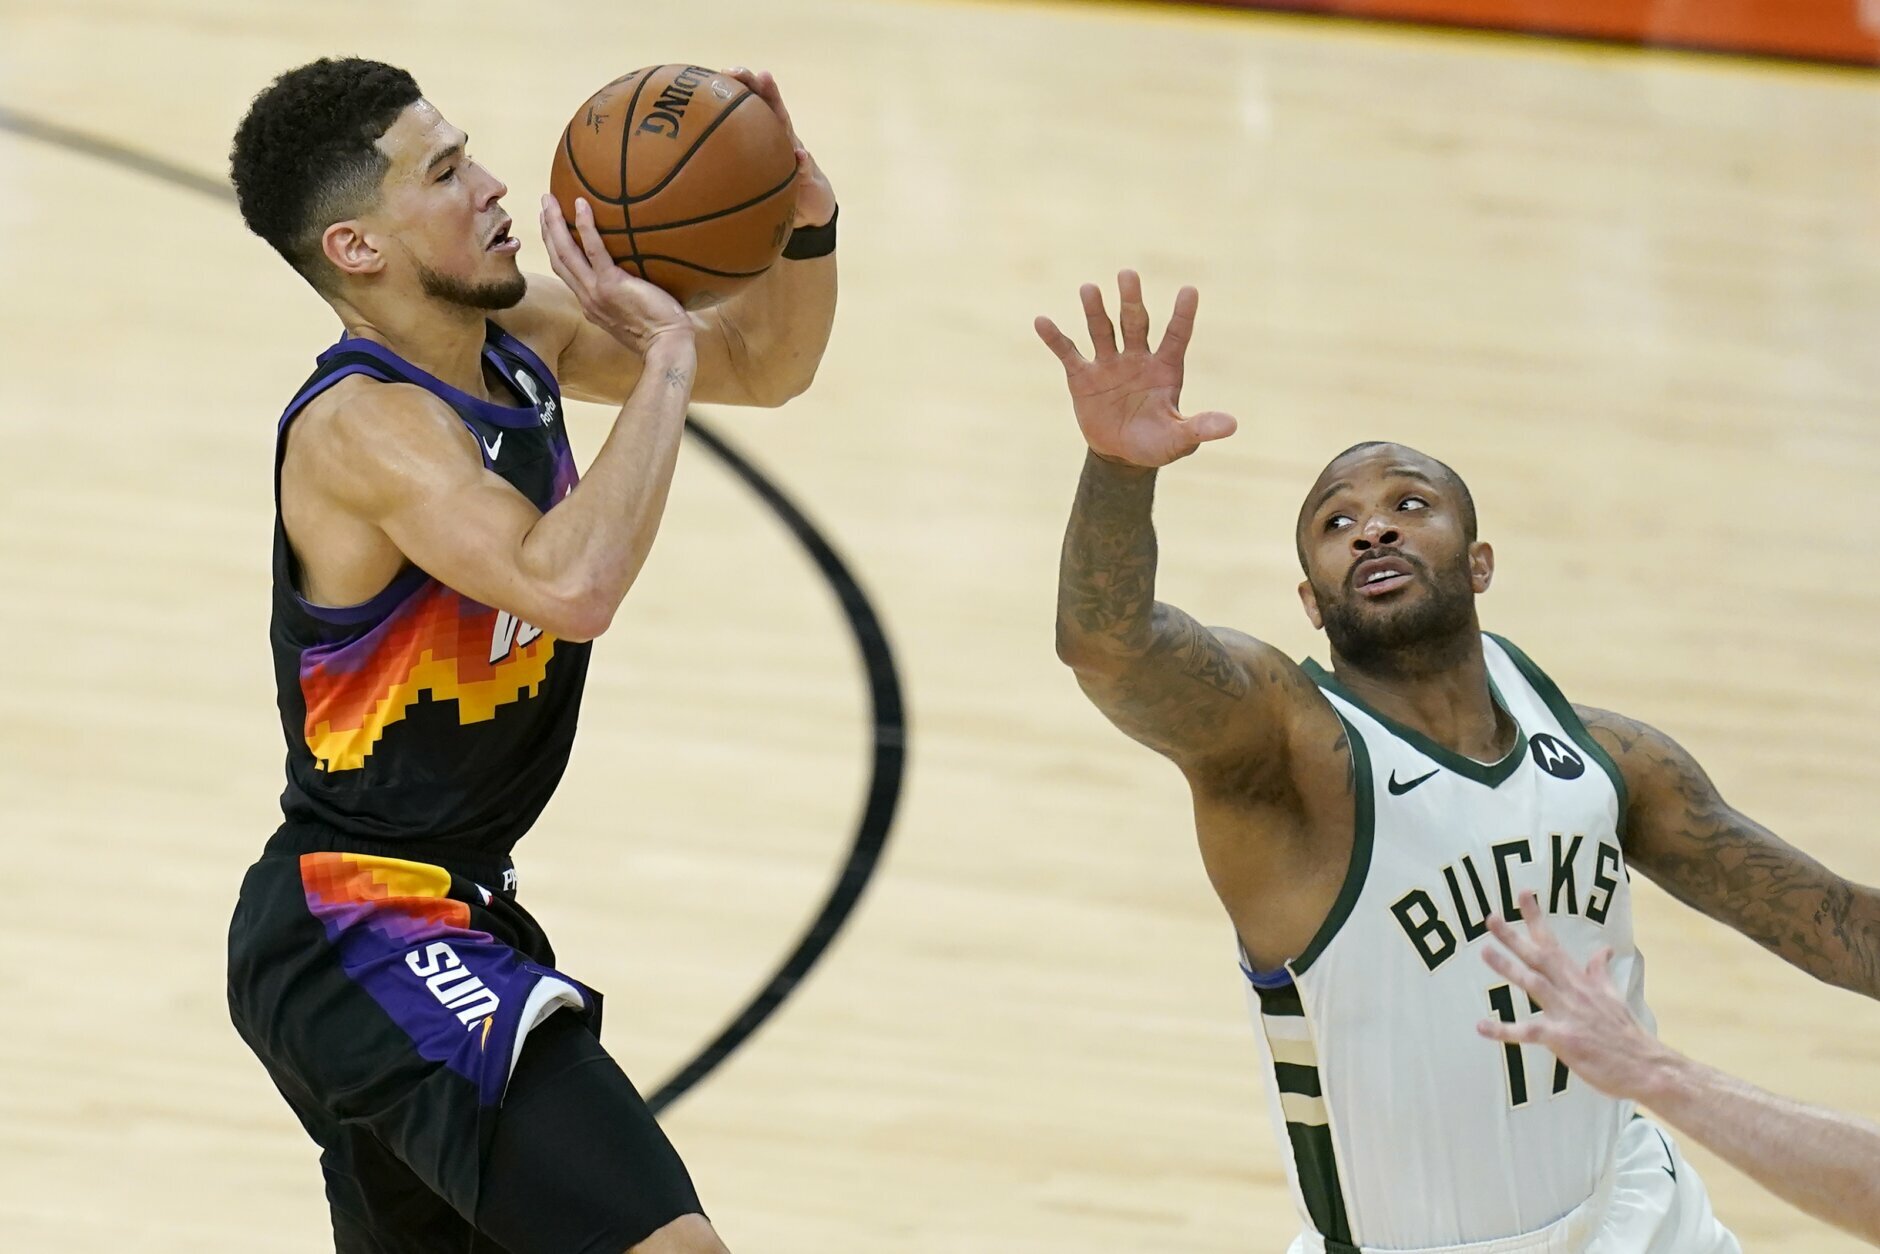 Booker's Suns career began with a push (and more) from P.J. Tucker